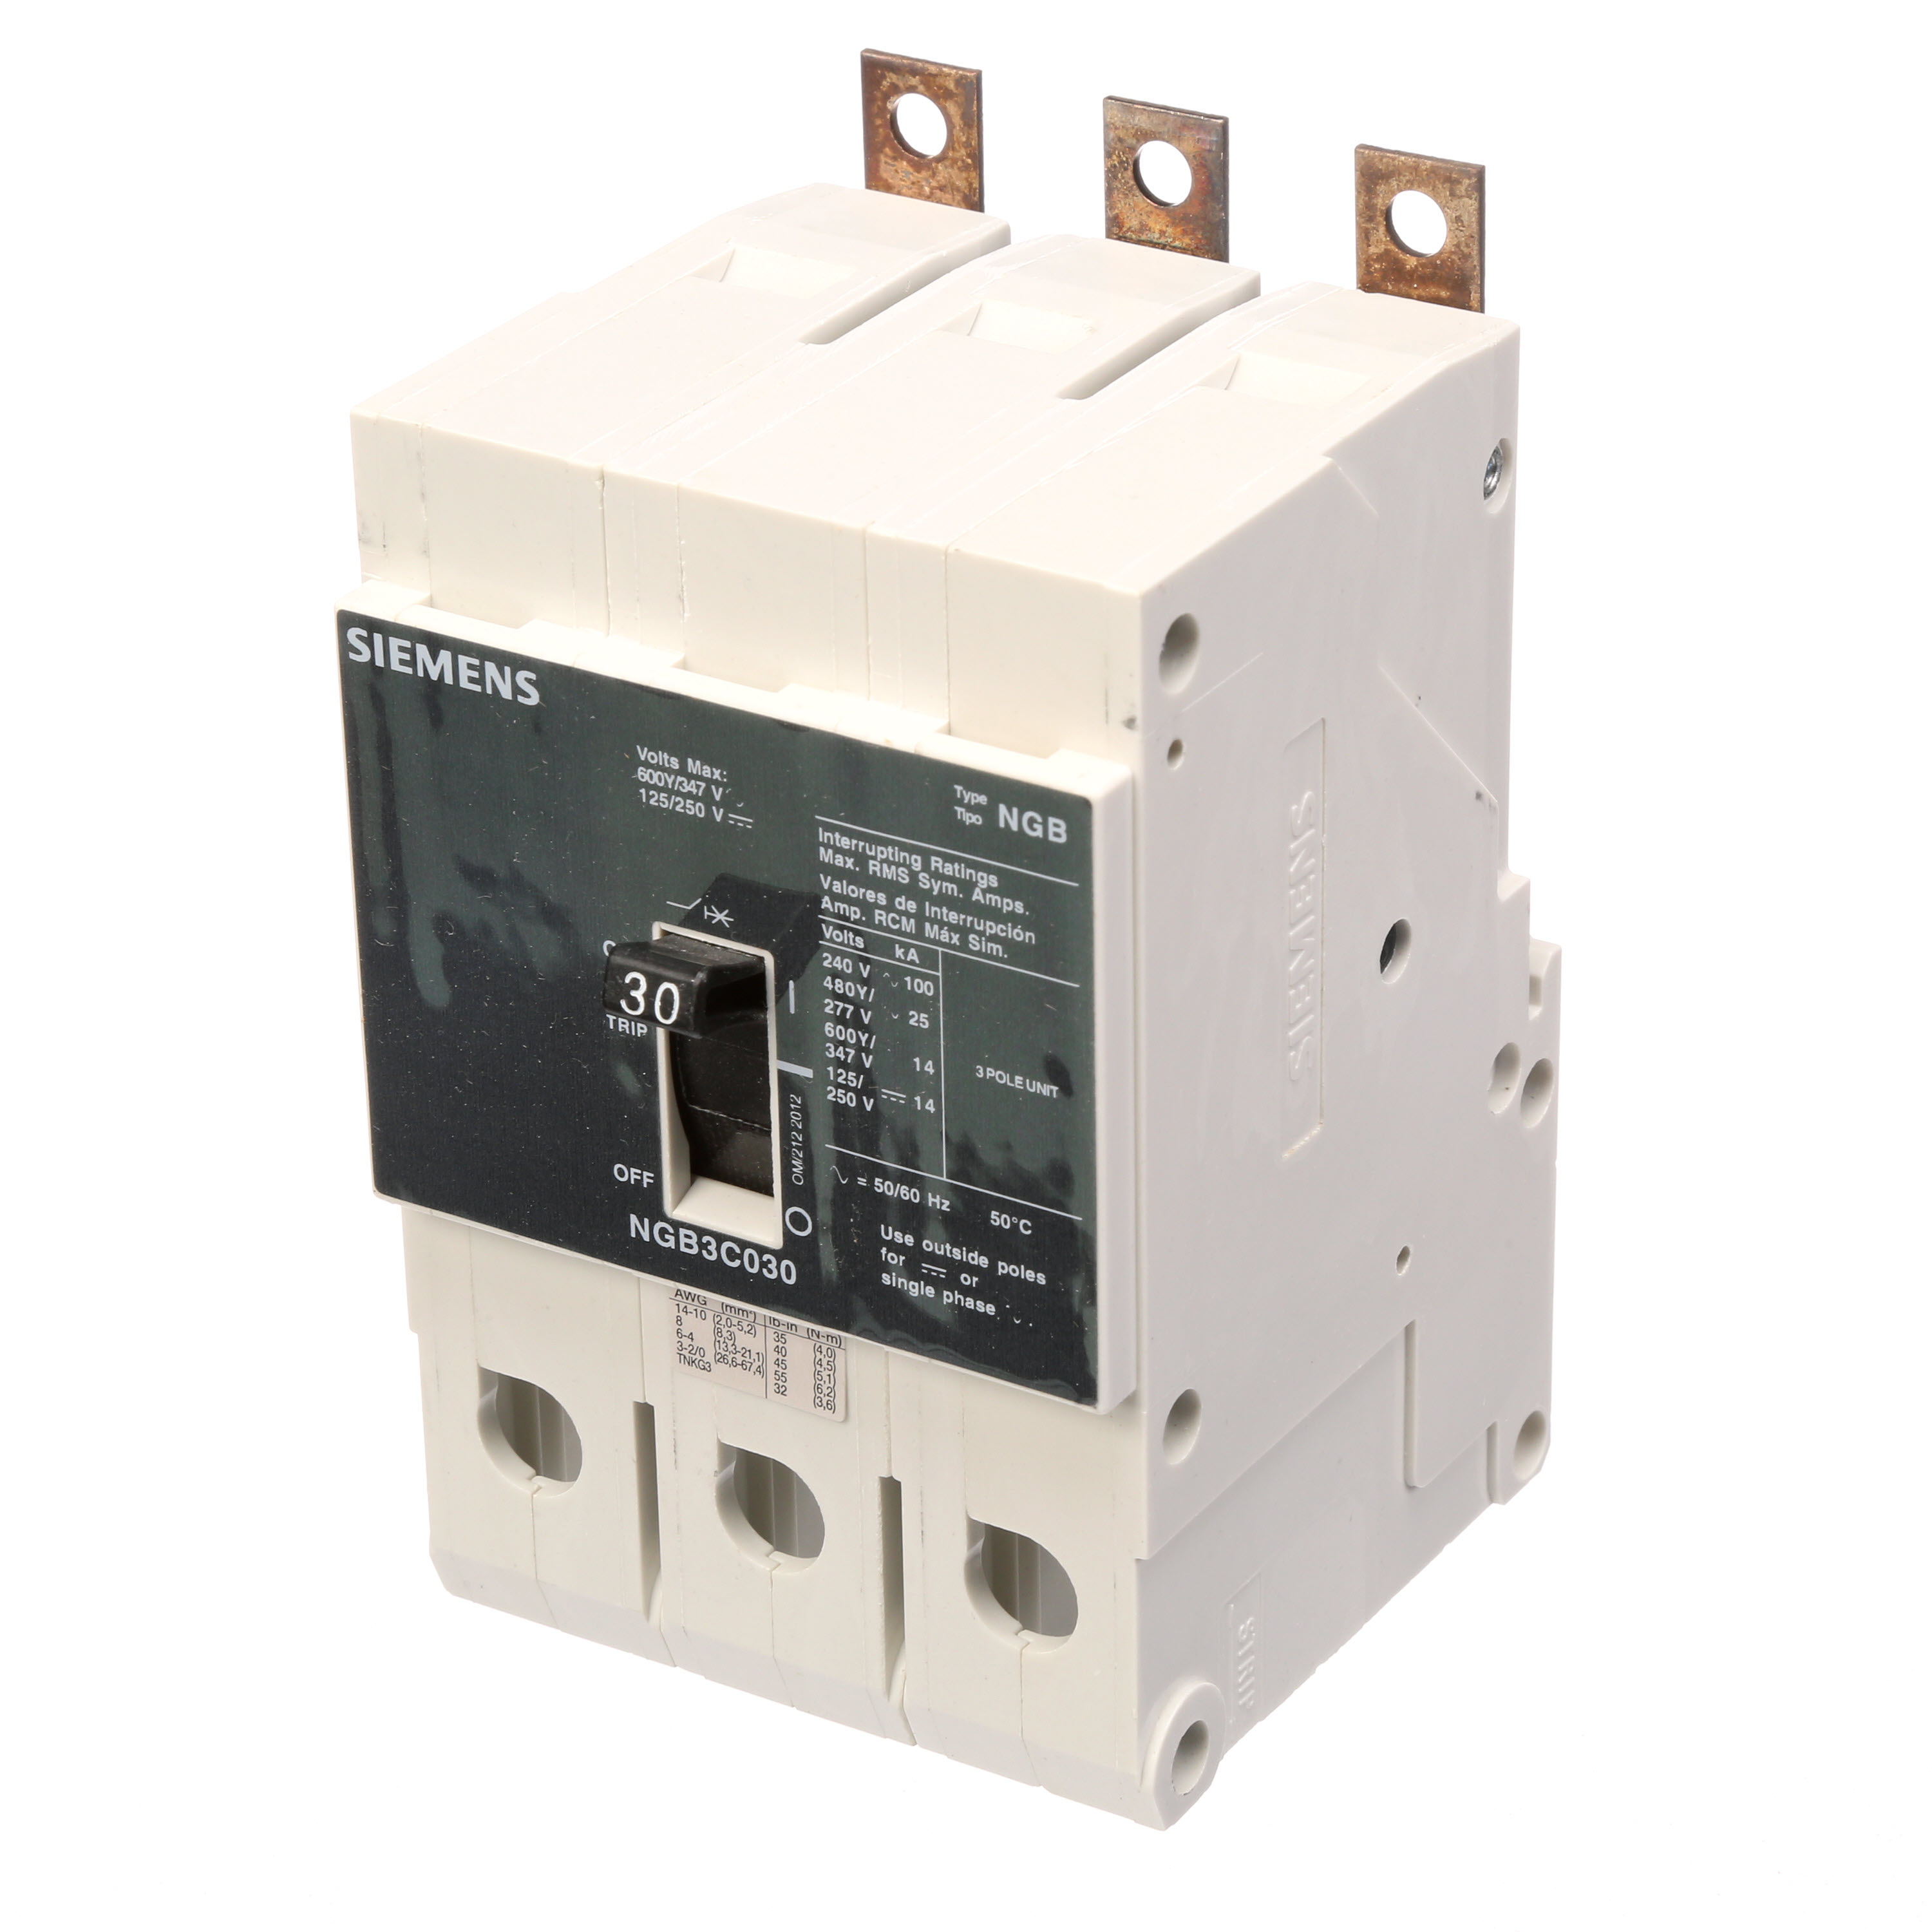 SIEMENS LOW VOLTAGE PANELBOARD MOUNT G FRAME CIRCUIT BREAKER WITH THERMAL - MAGNETIC TRIP. NON UL NGB FRAME WITH STANDARD BREAKING C APACITY. 30A 3-POLE (14KAIC AT 600Y/347V) (25KAIC AT 480Y/277V). SPECIAL FEATURES MOUNTS ON PANELBOARD, 50DEG CALIBRATION, LOAD SIDE LUGS ONLY (TC1Q1) WIRE RANGE 14 - 10 AWS (CU/AL). DIMENSIONS (W x H x D) IN 3 x 5.4 x 2.8.